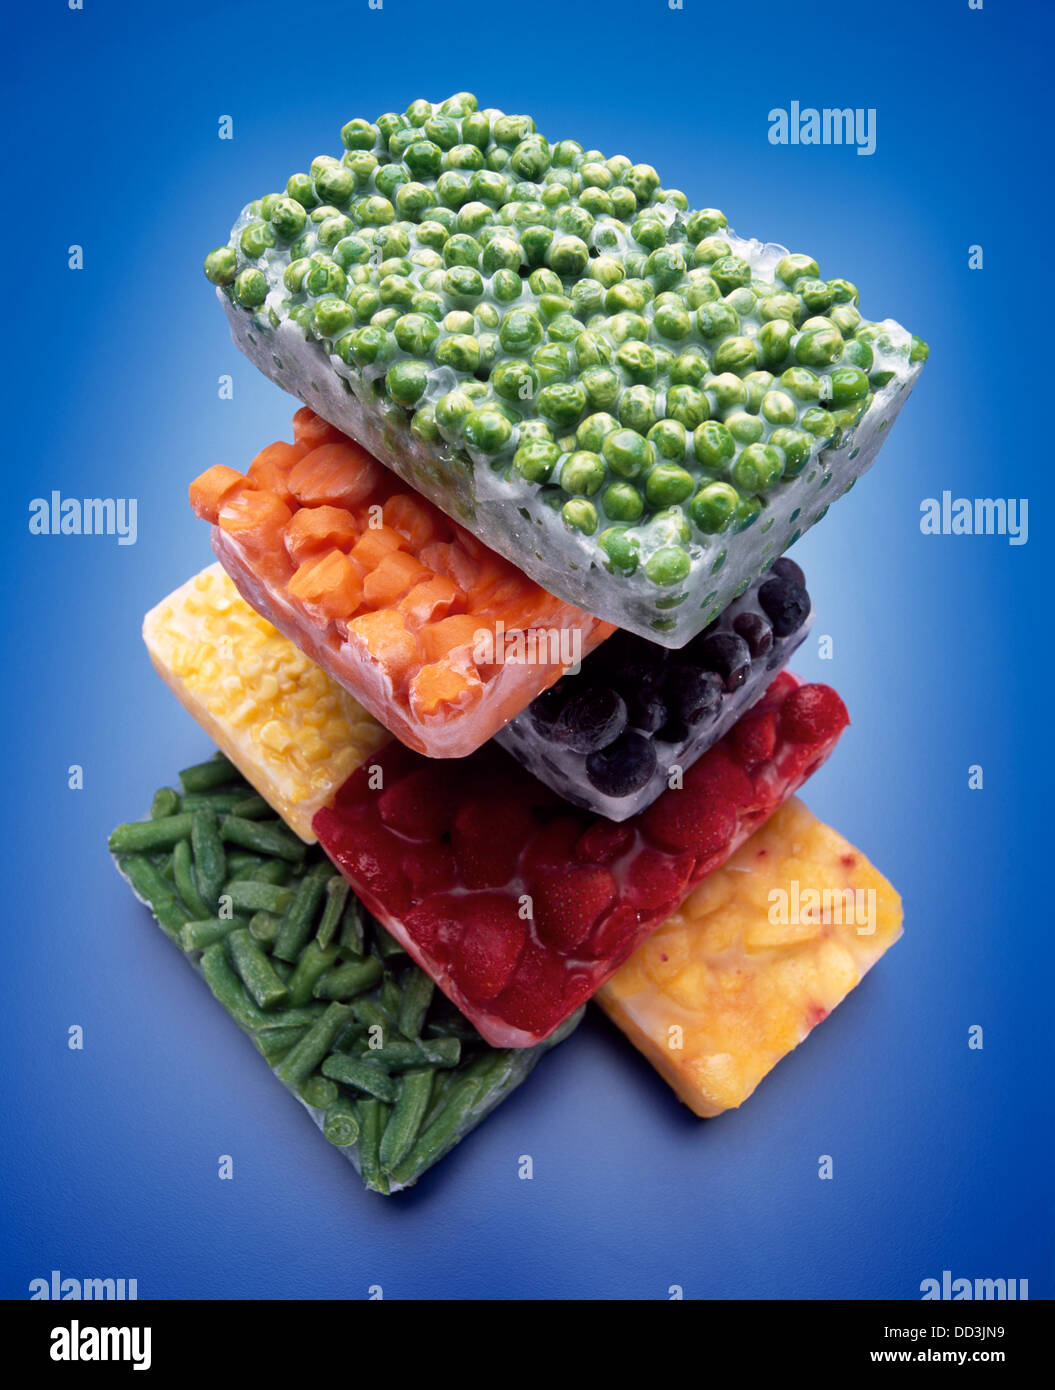 A large stack of frozen blocks of food; green peas, carrots, blackberries, corn, strawberries, peaches and green beans. Stock Photo